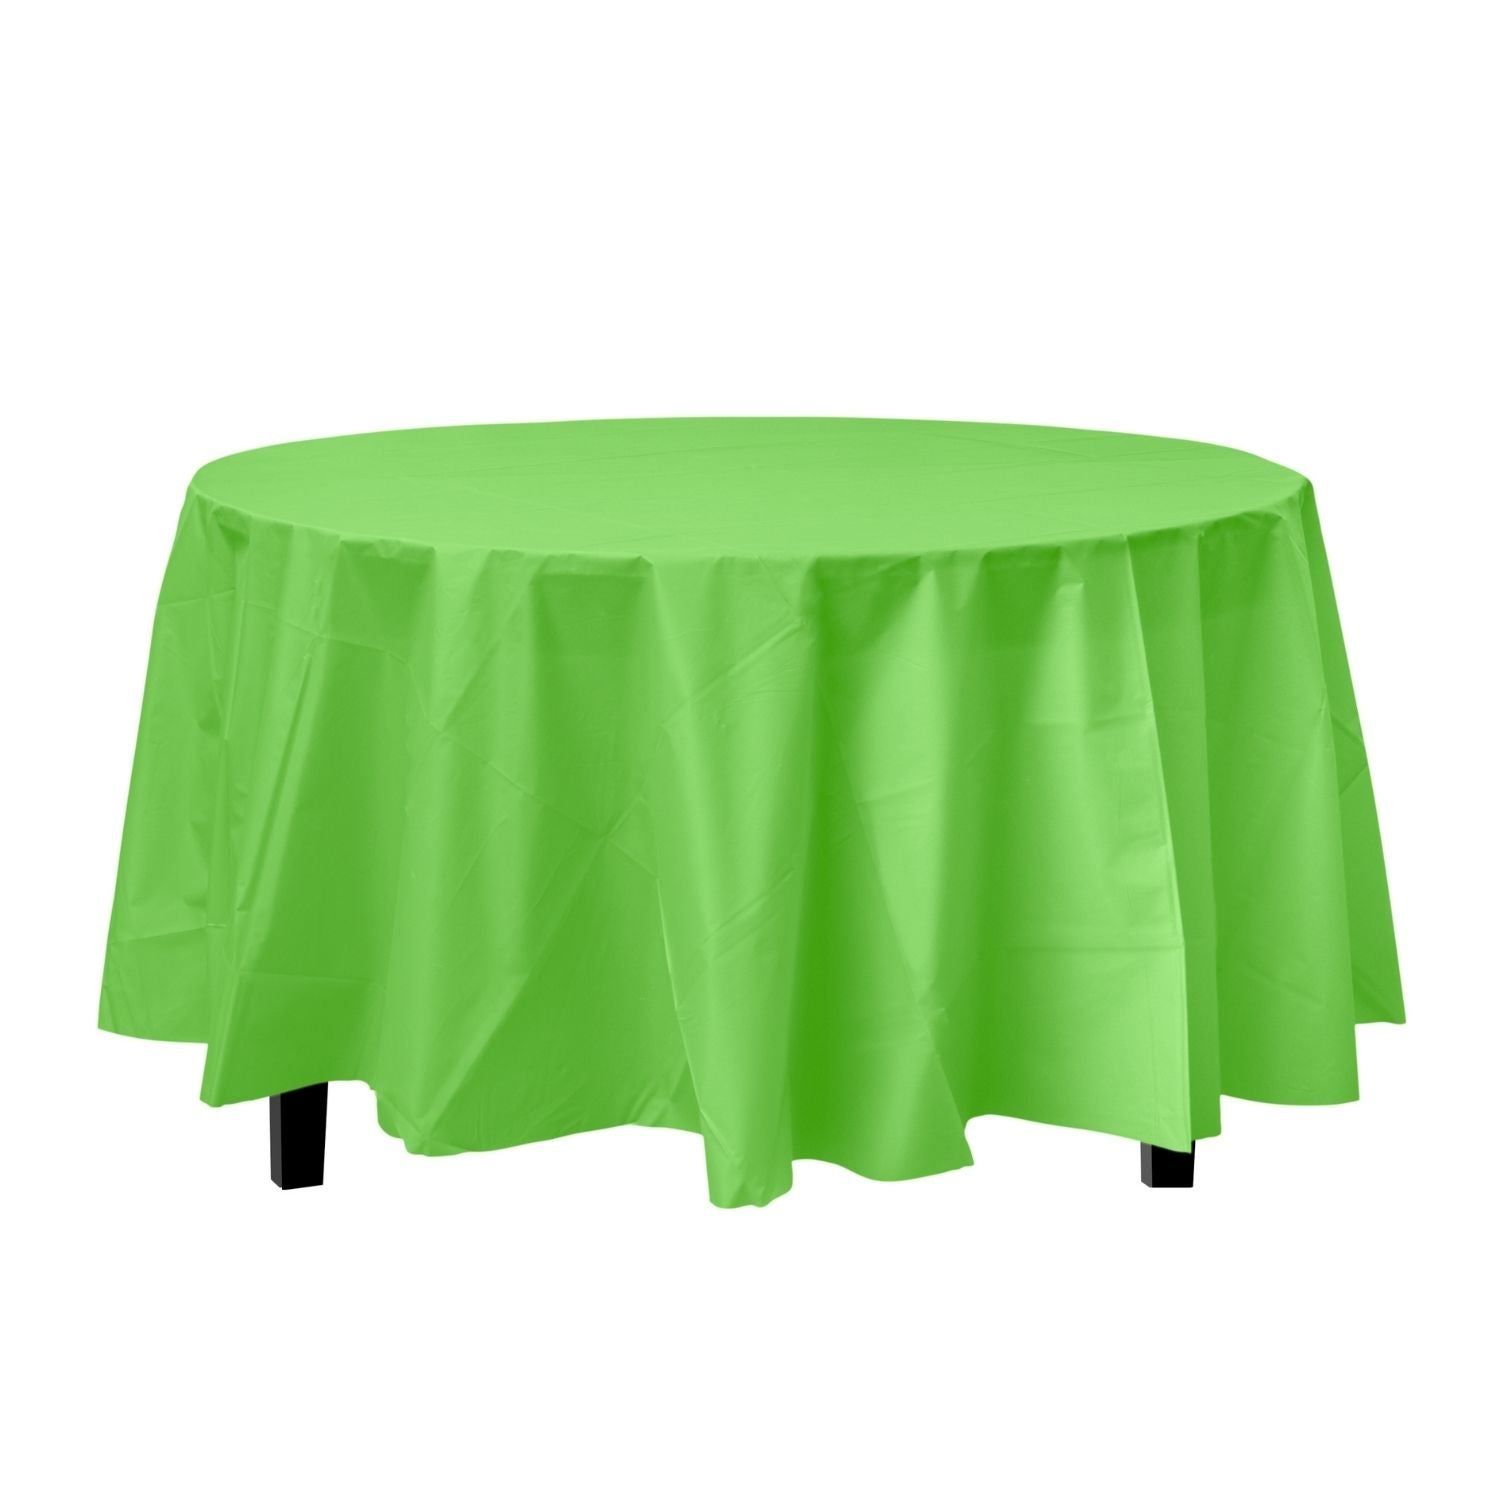 Premium Round Lime Green Plastic Tablecloth | 96 Count